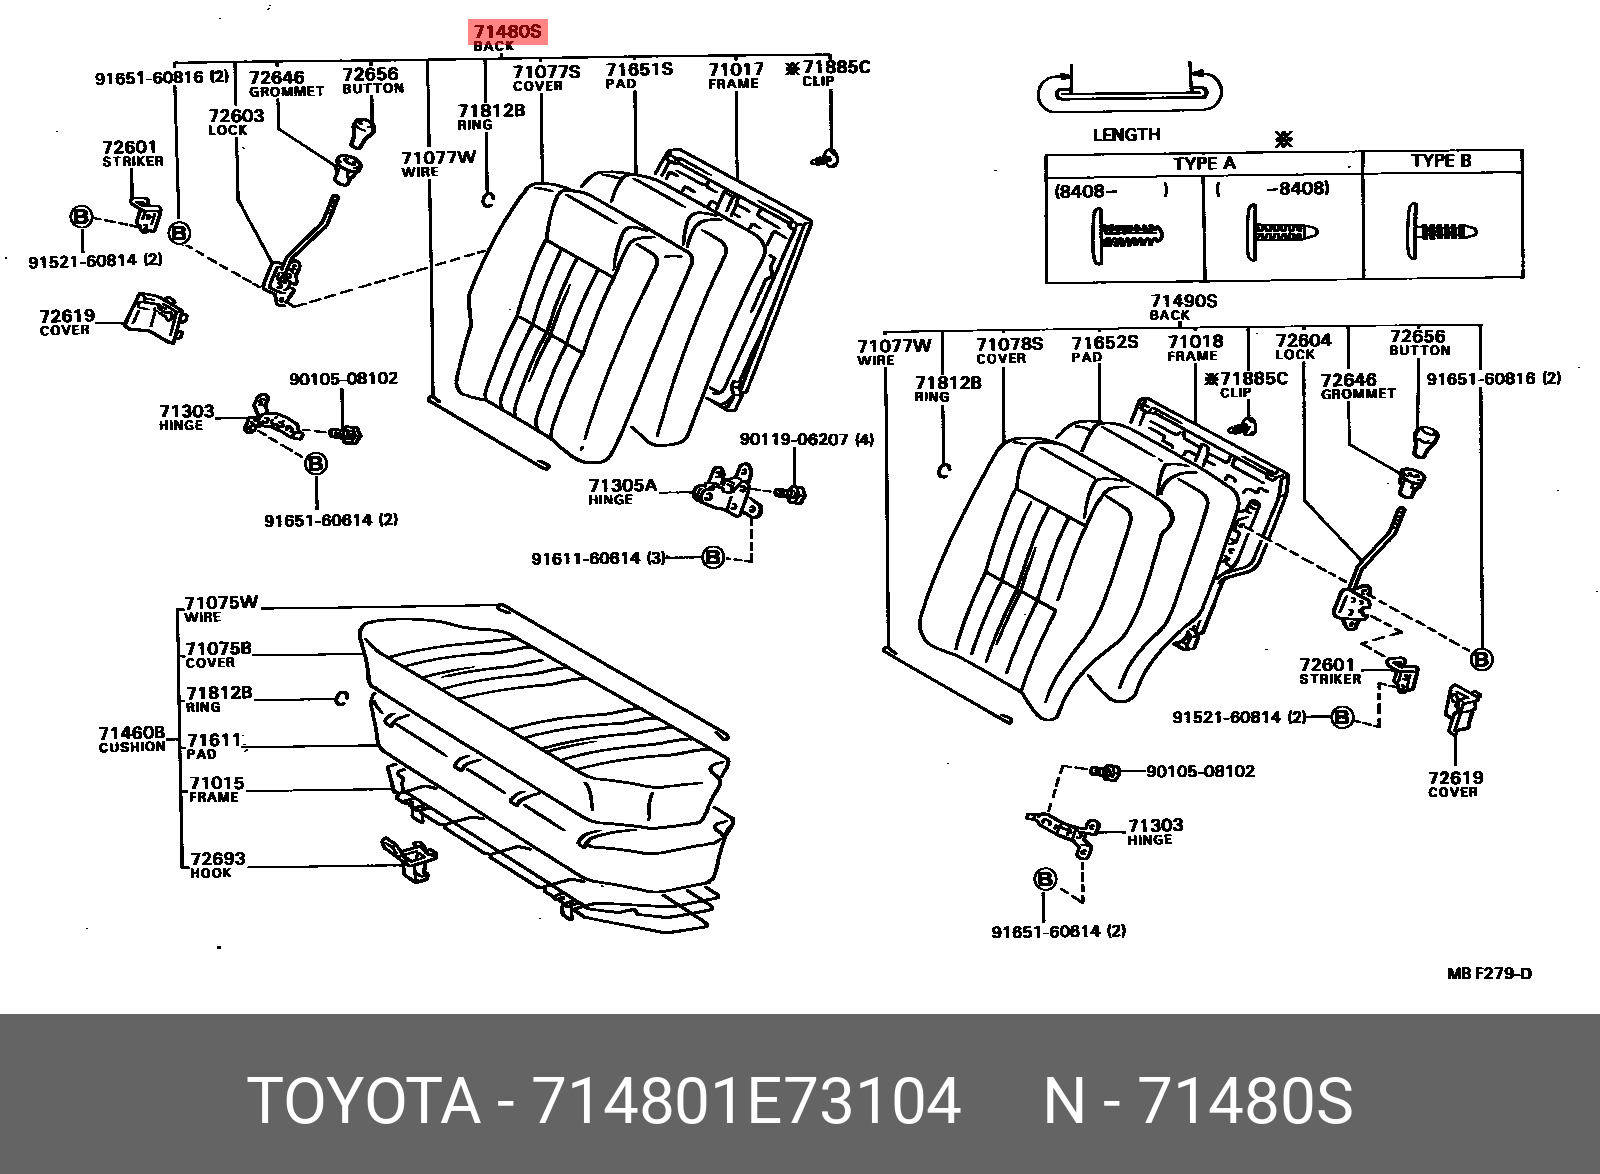 COROLLA 198305 - 198704, BACK ASSY, REAR SEAT, RH (FOR SEPARATE TYPE)